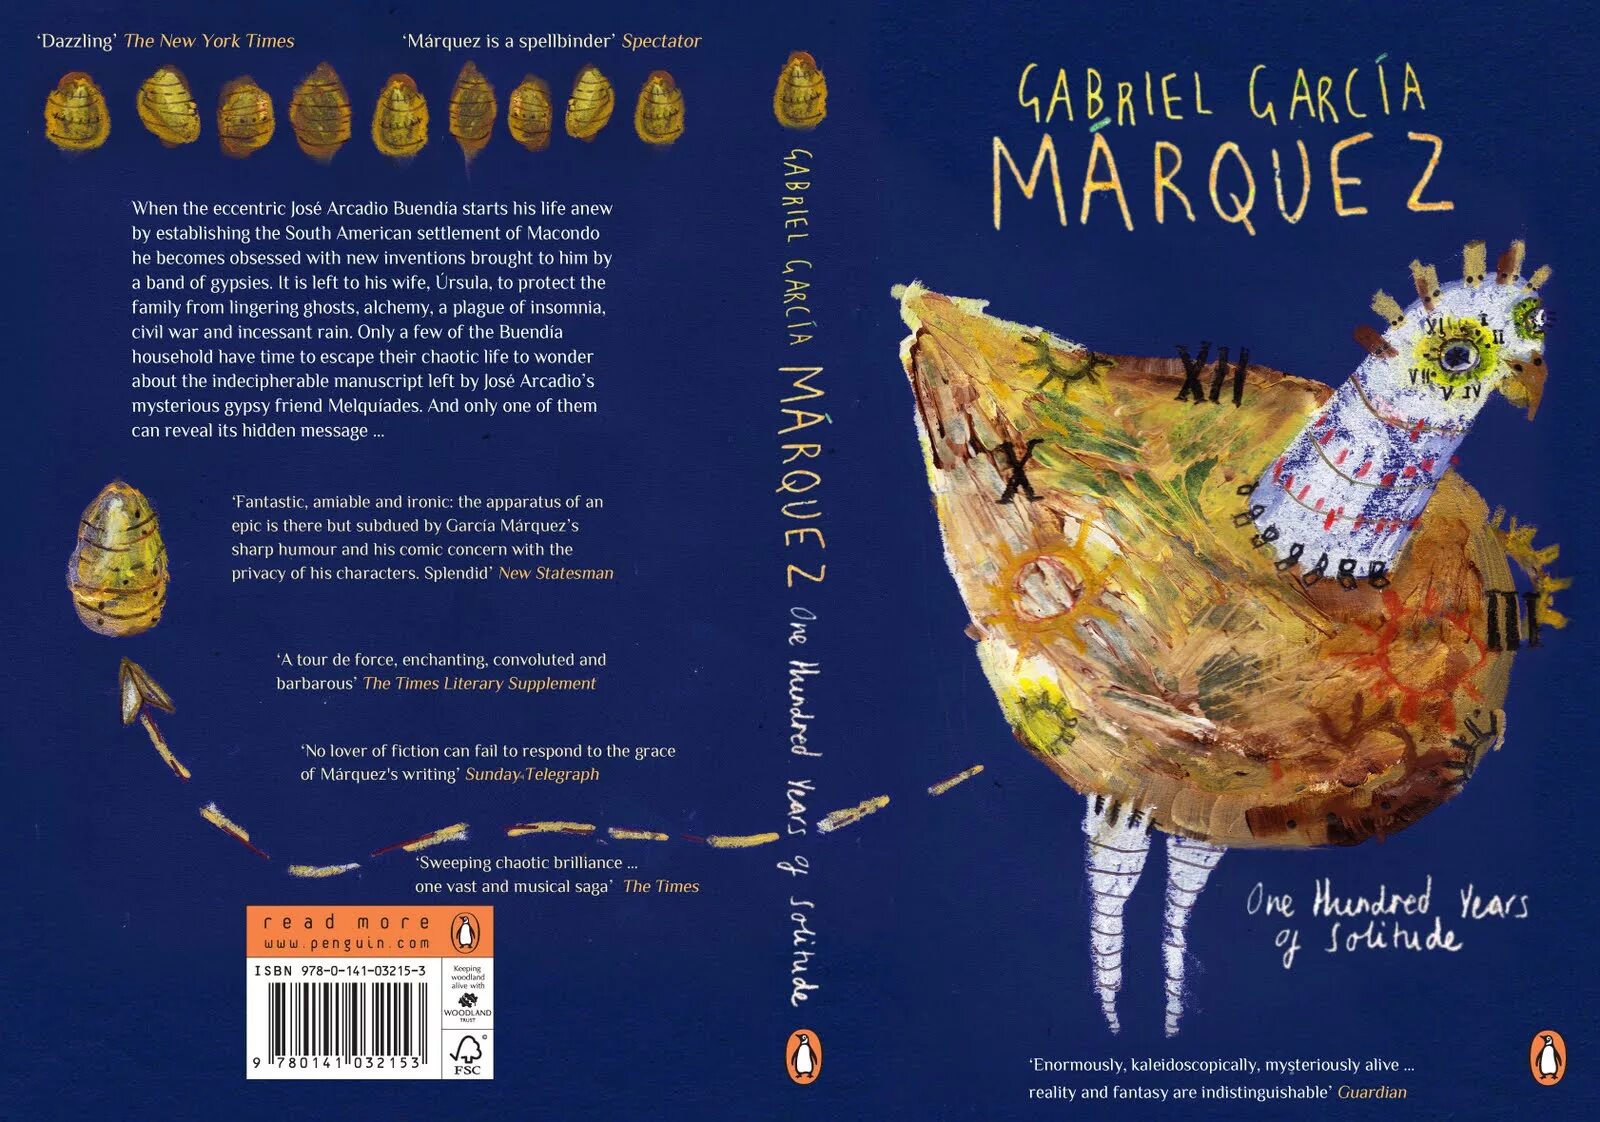 One hundred years is. One hundred years of Solitude. One hundred years of Solitude by Gabriel Garcia Marquez. 100 Years of Solitude. One hundred years of Solitude book Cover.